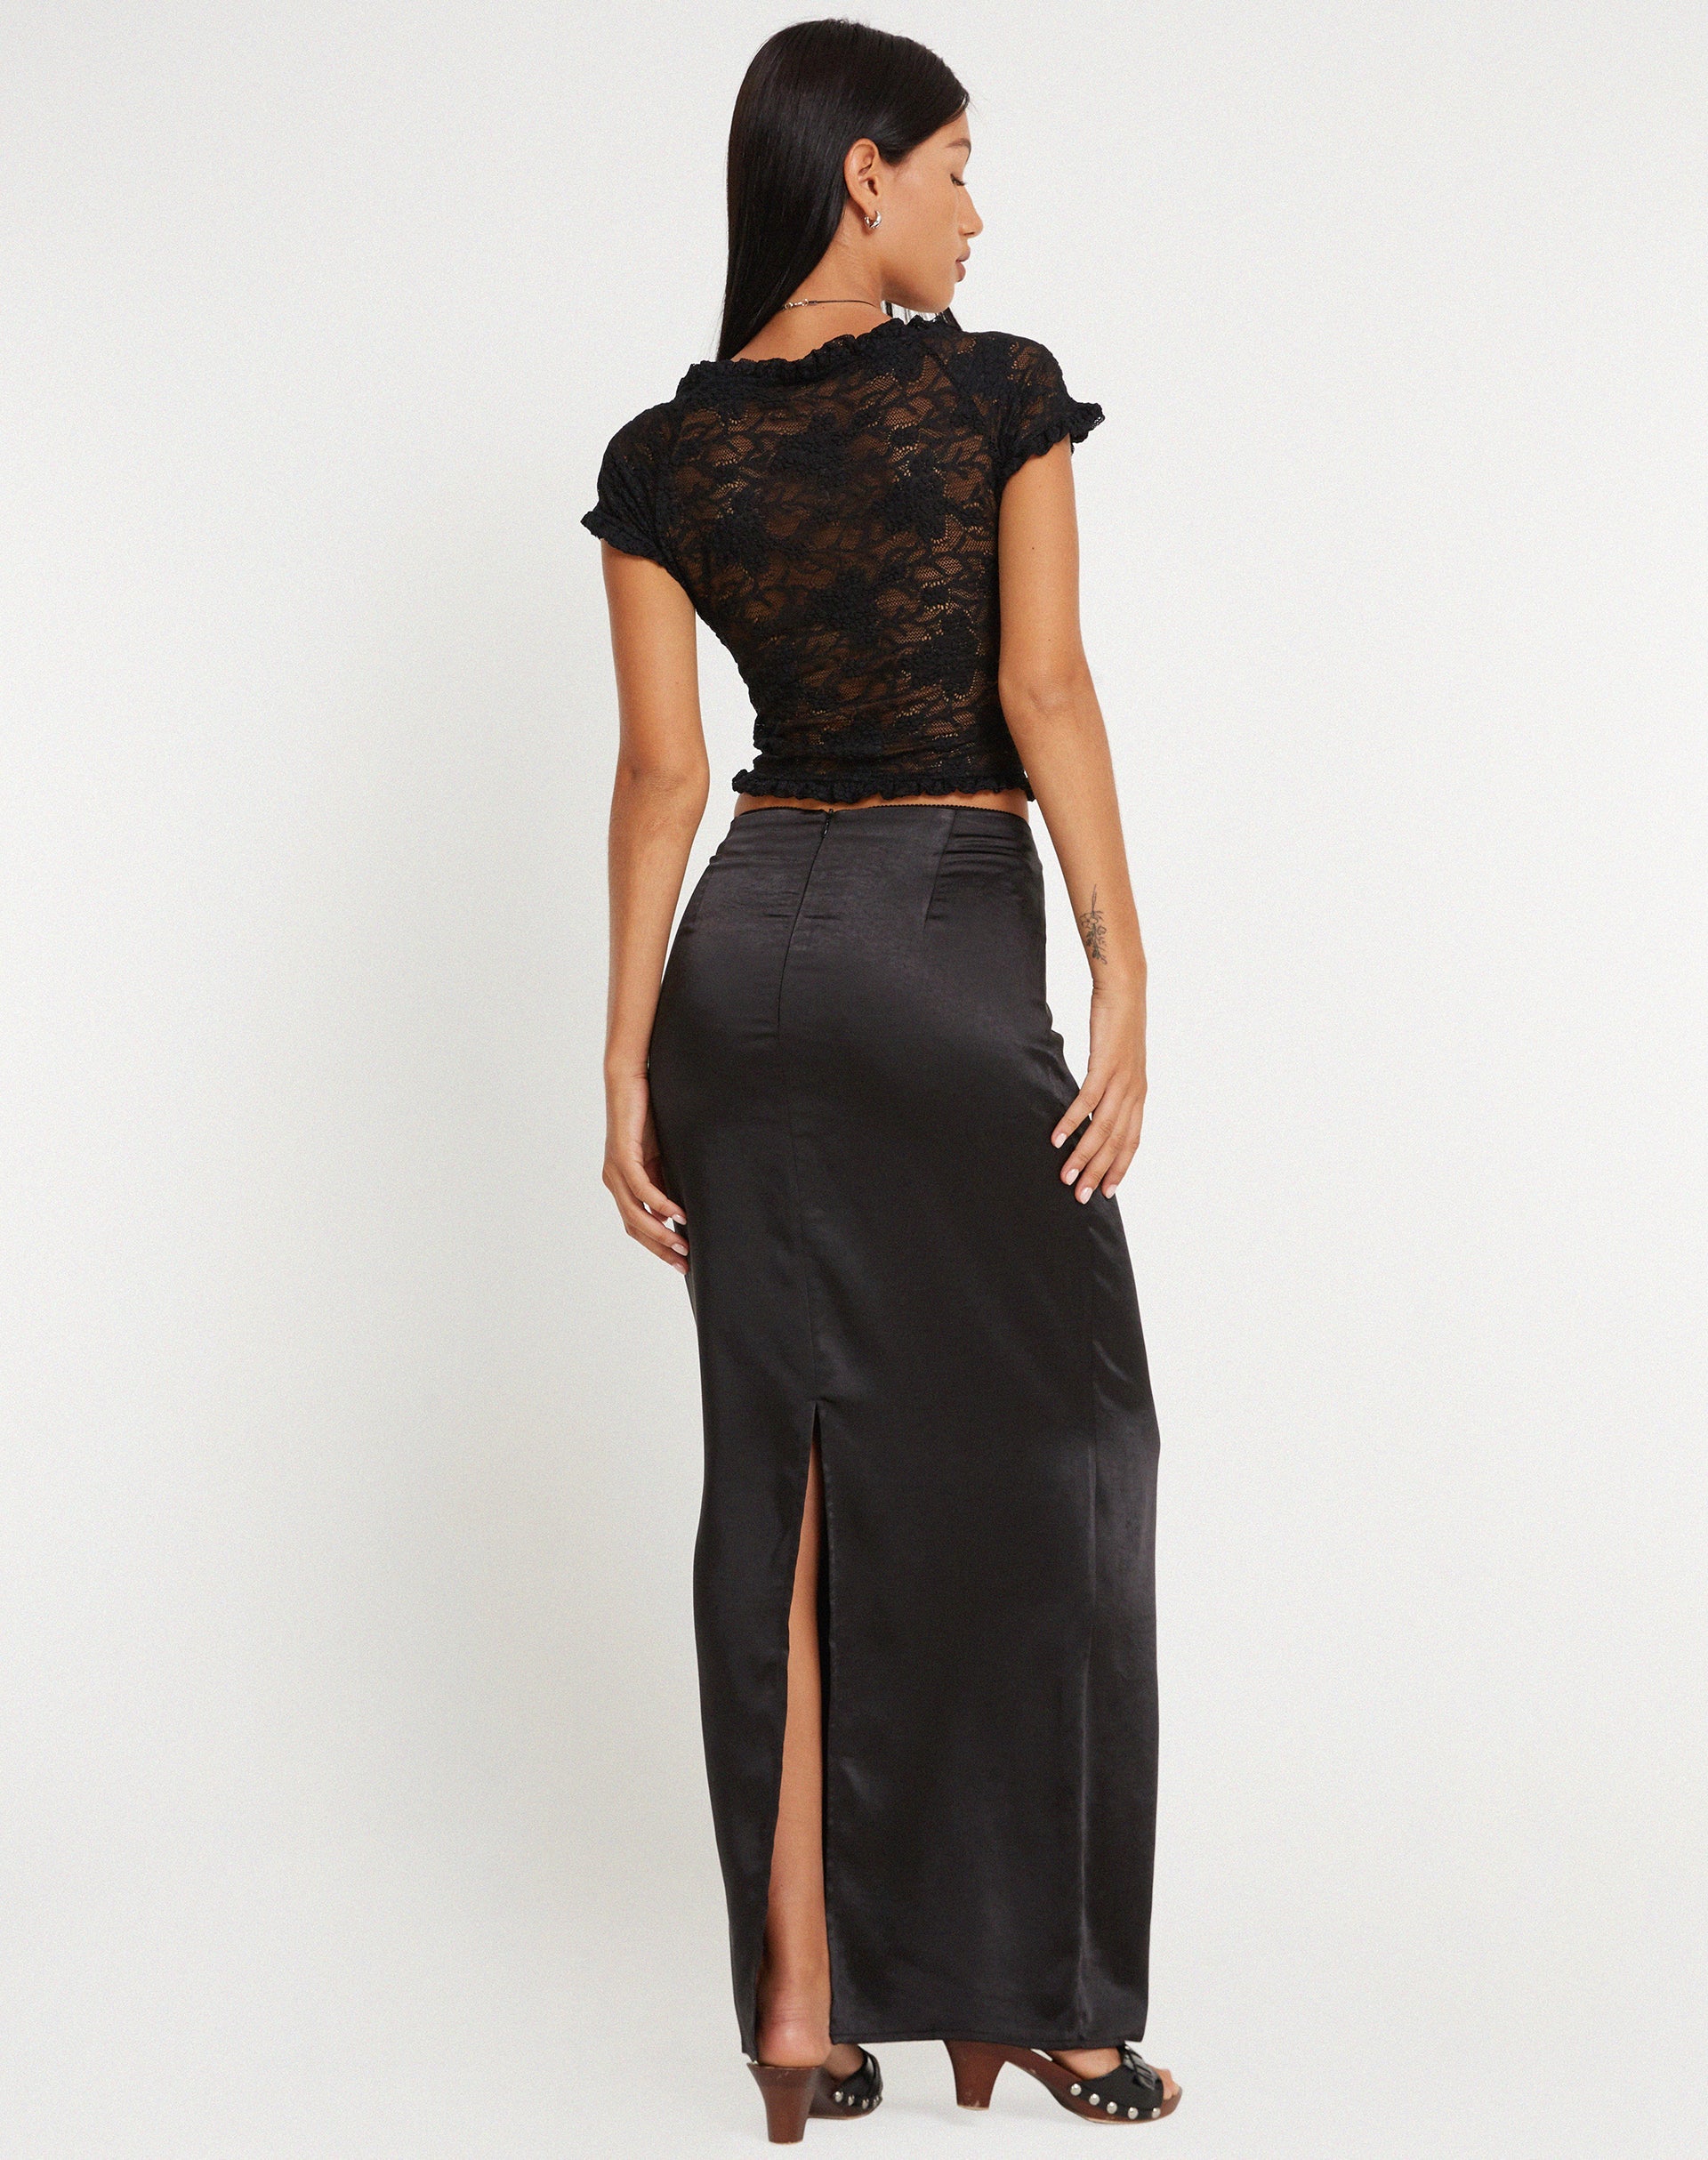 image of Rufte Top in Lace Black